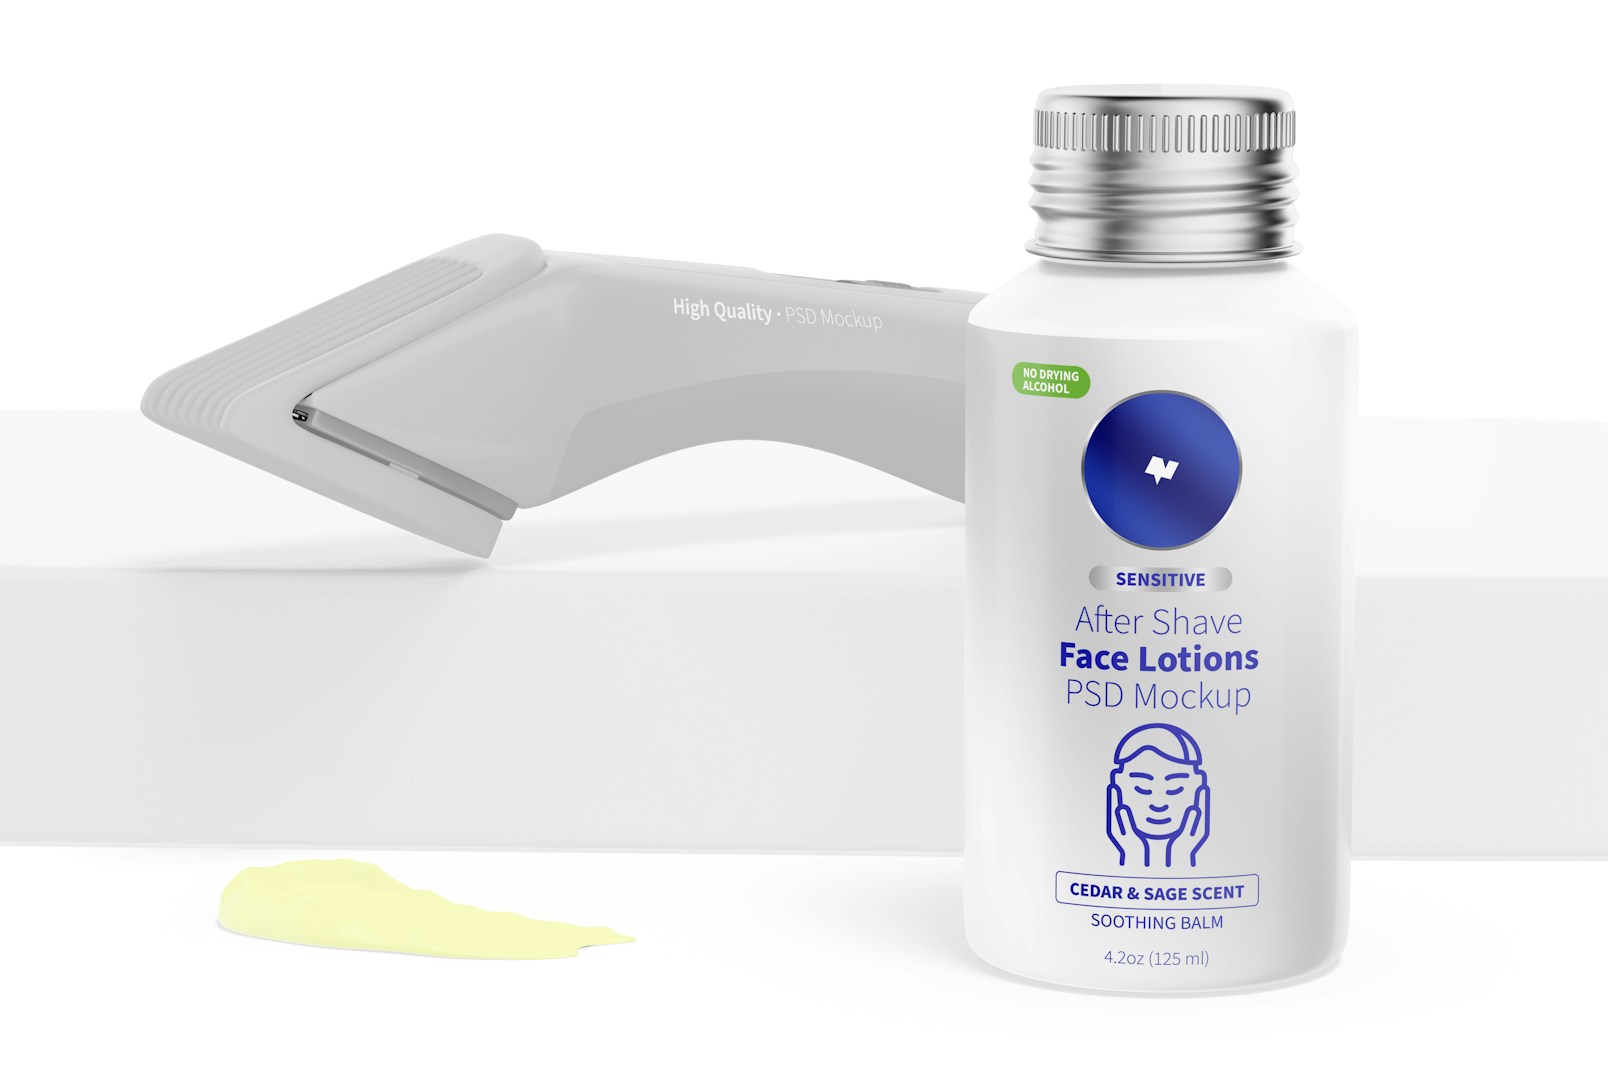 4.2 oz After Shave Face Lotion with Razor Mockup